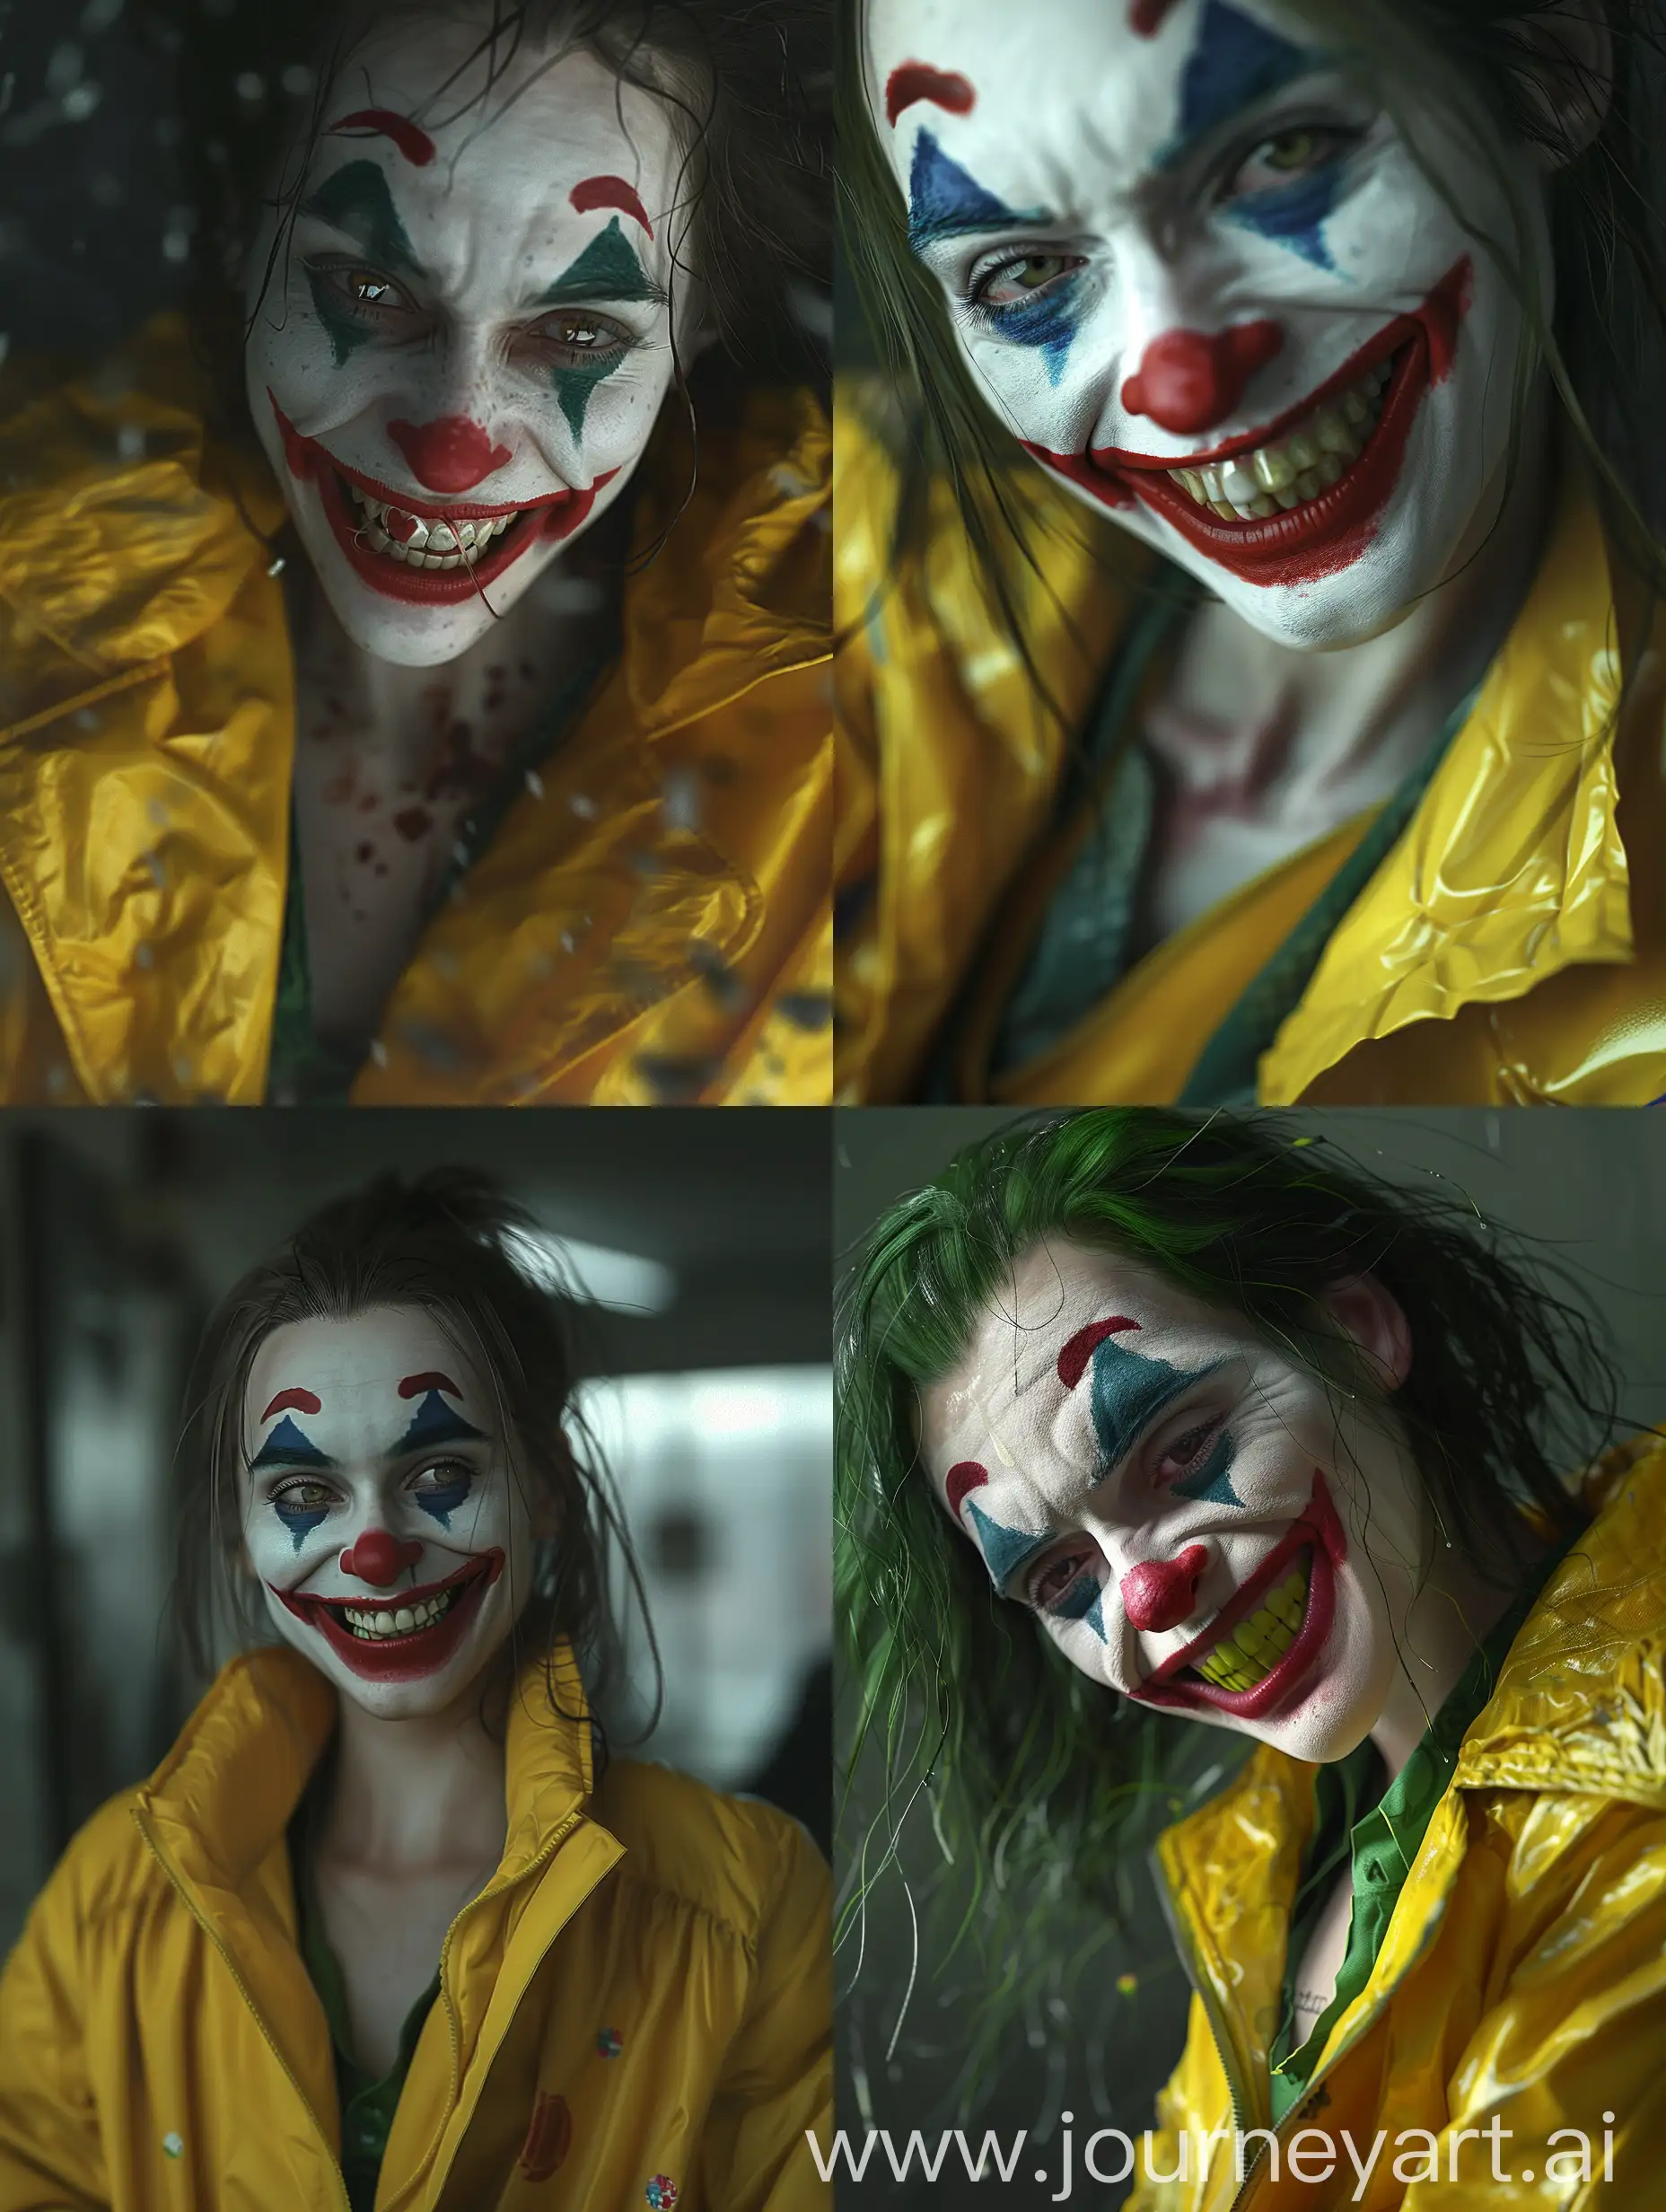 Smiling-Joker-Girl-in-Yellow-Jacket-Hyperrealistic-Portrait-with-Cinematic-Effects